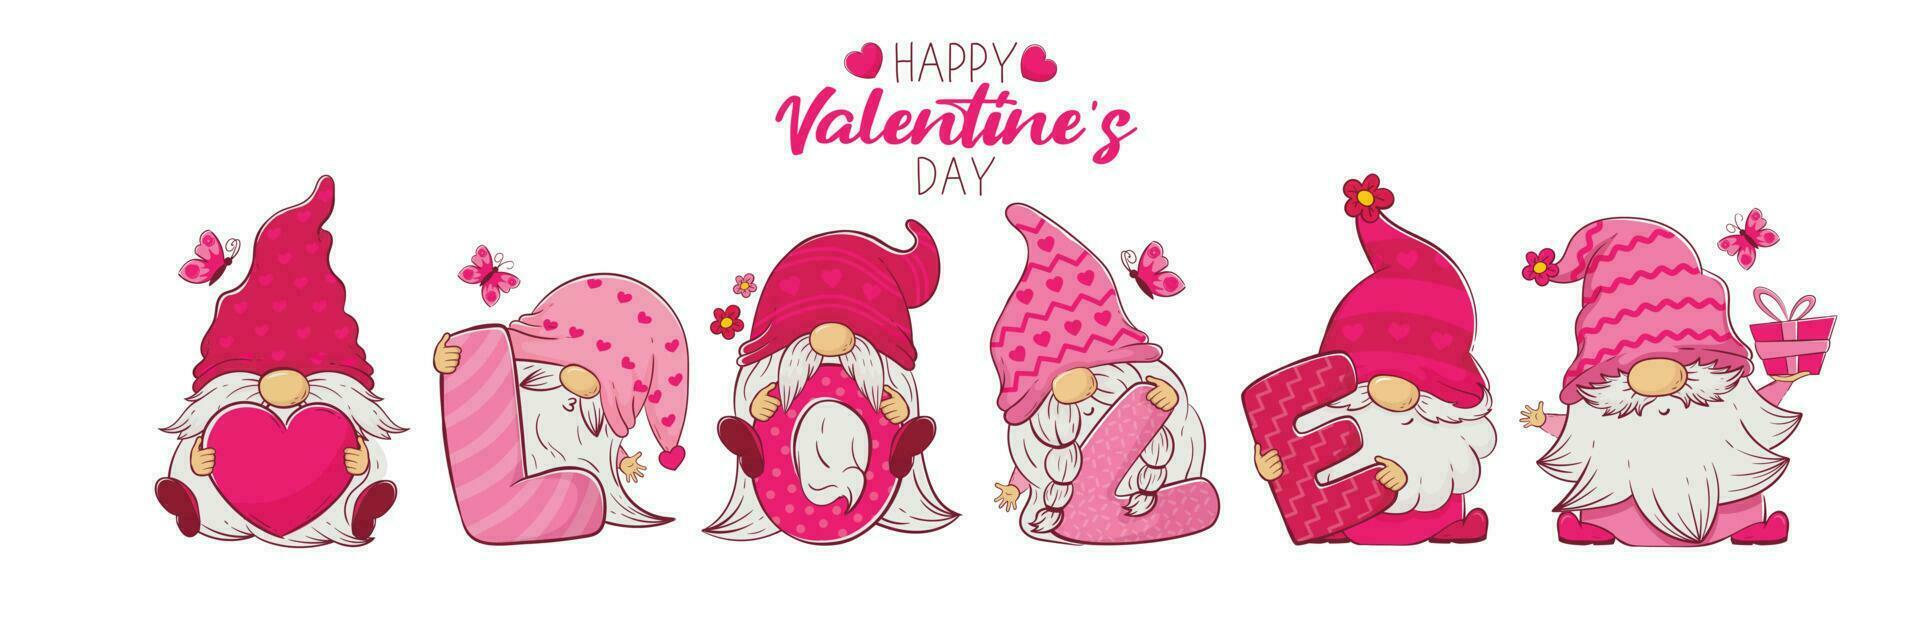 adorable cartoon gnomes holding letters that spell out the word love vector